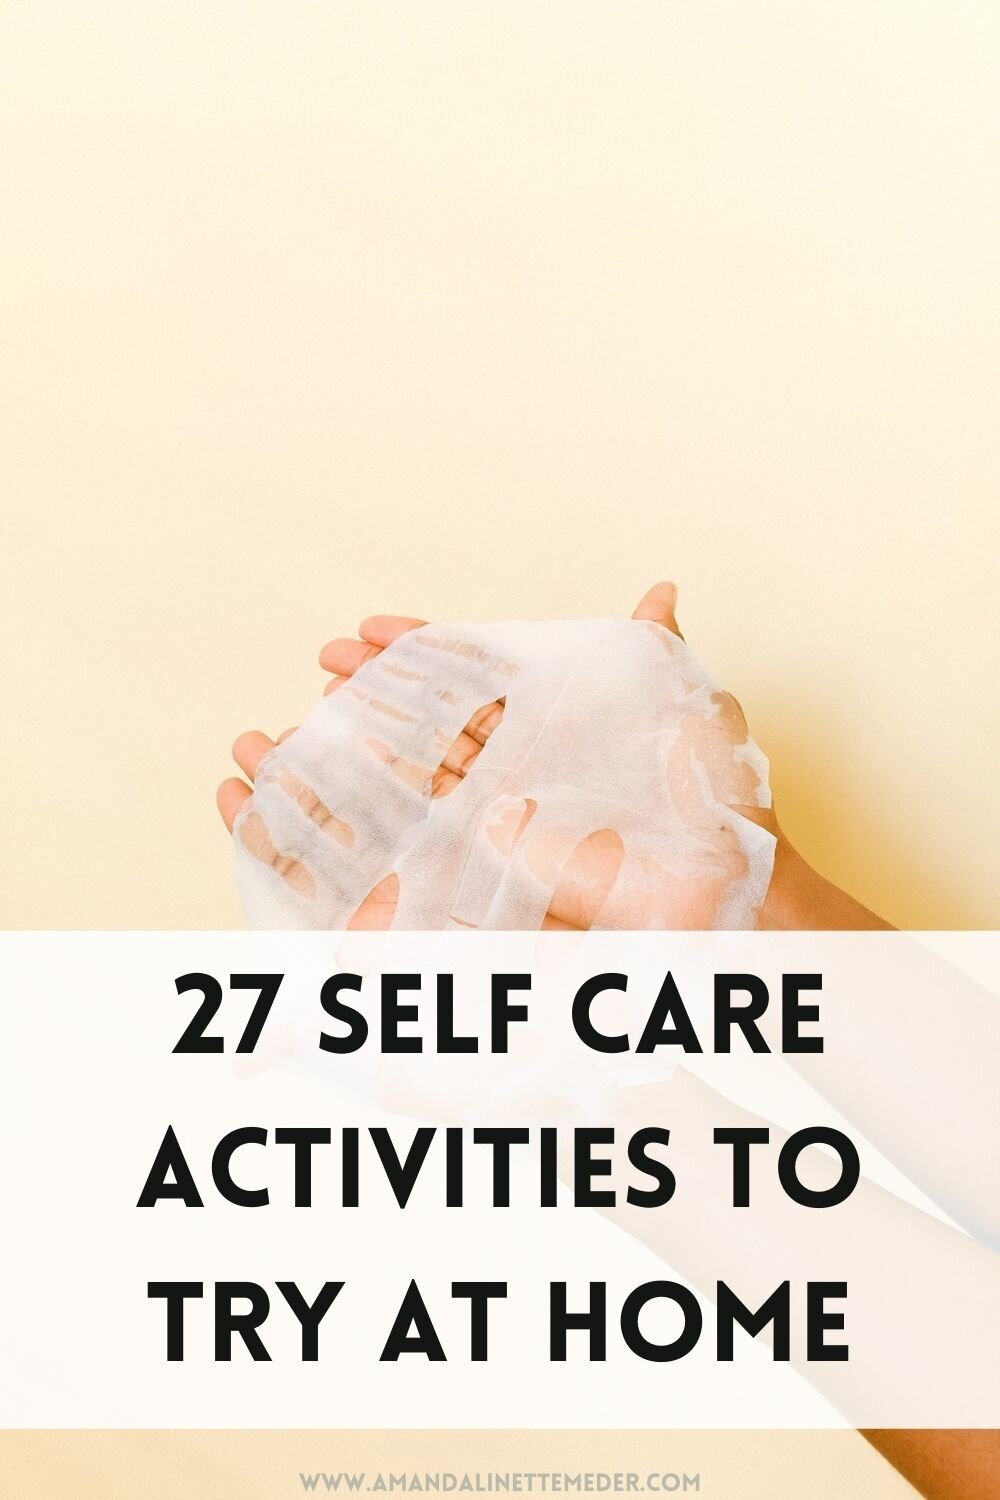 27 Self Care Activities To Try At Home over photo of person holding a sheet mask for skincare on mellow yellow background by Anna Shvets from Pexels